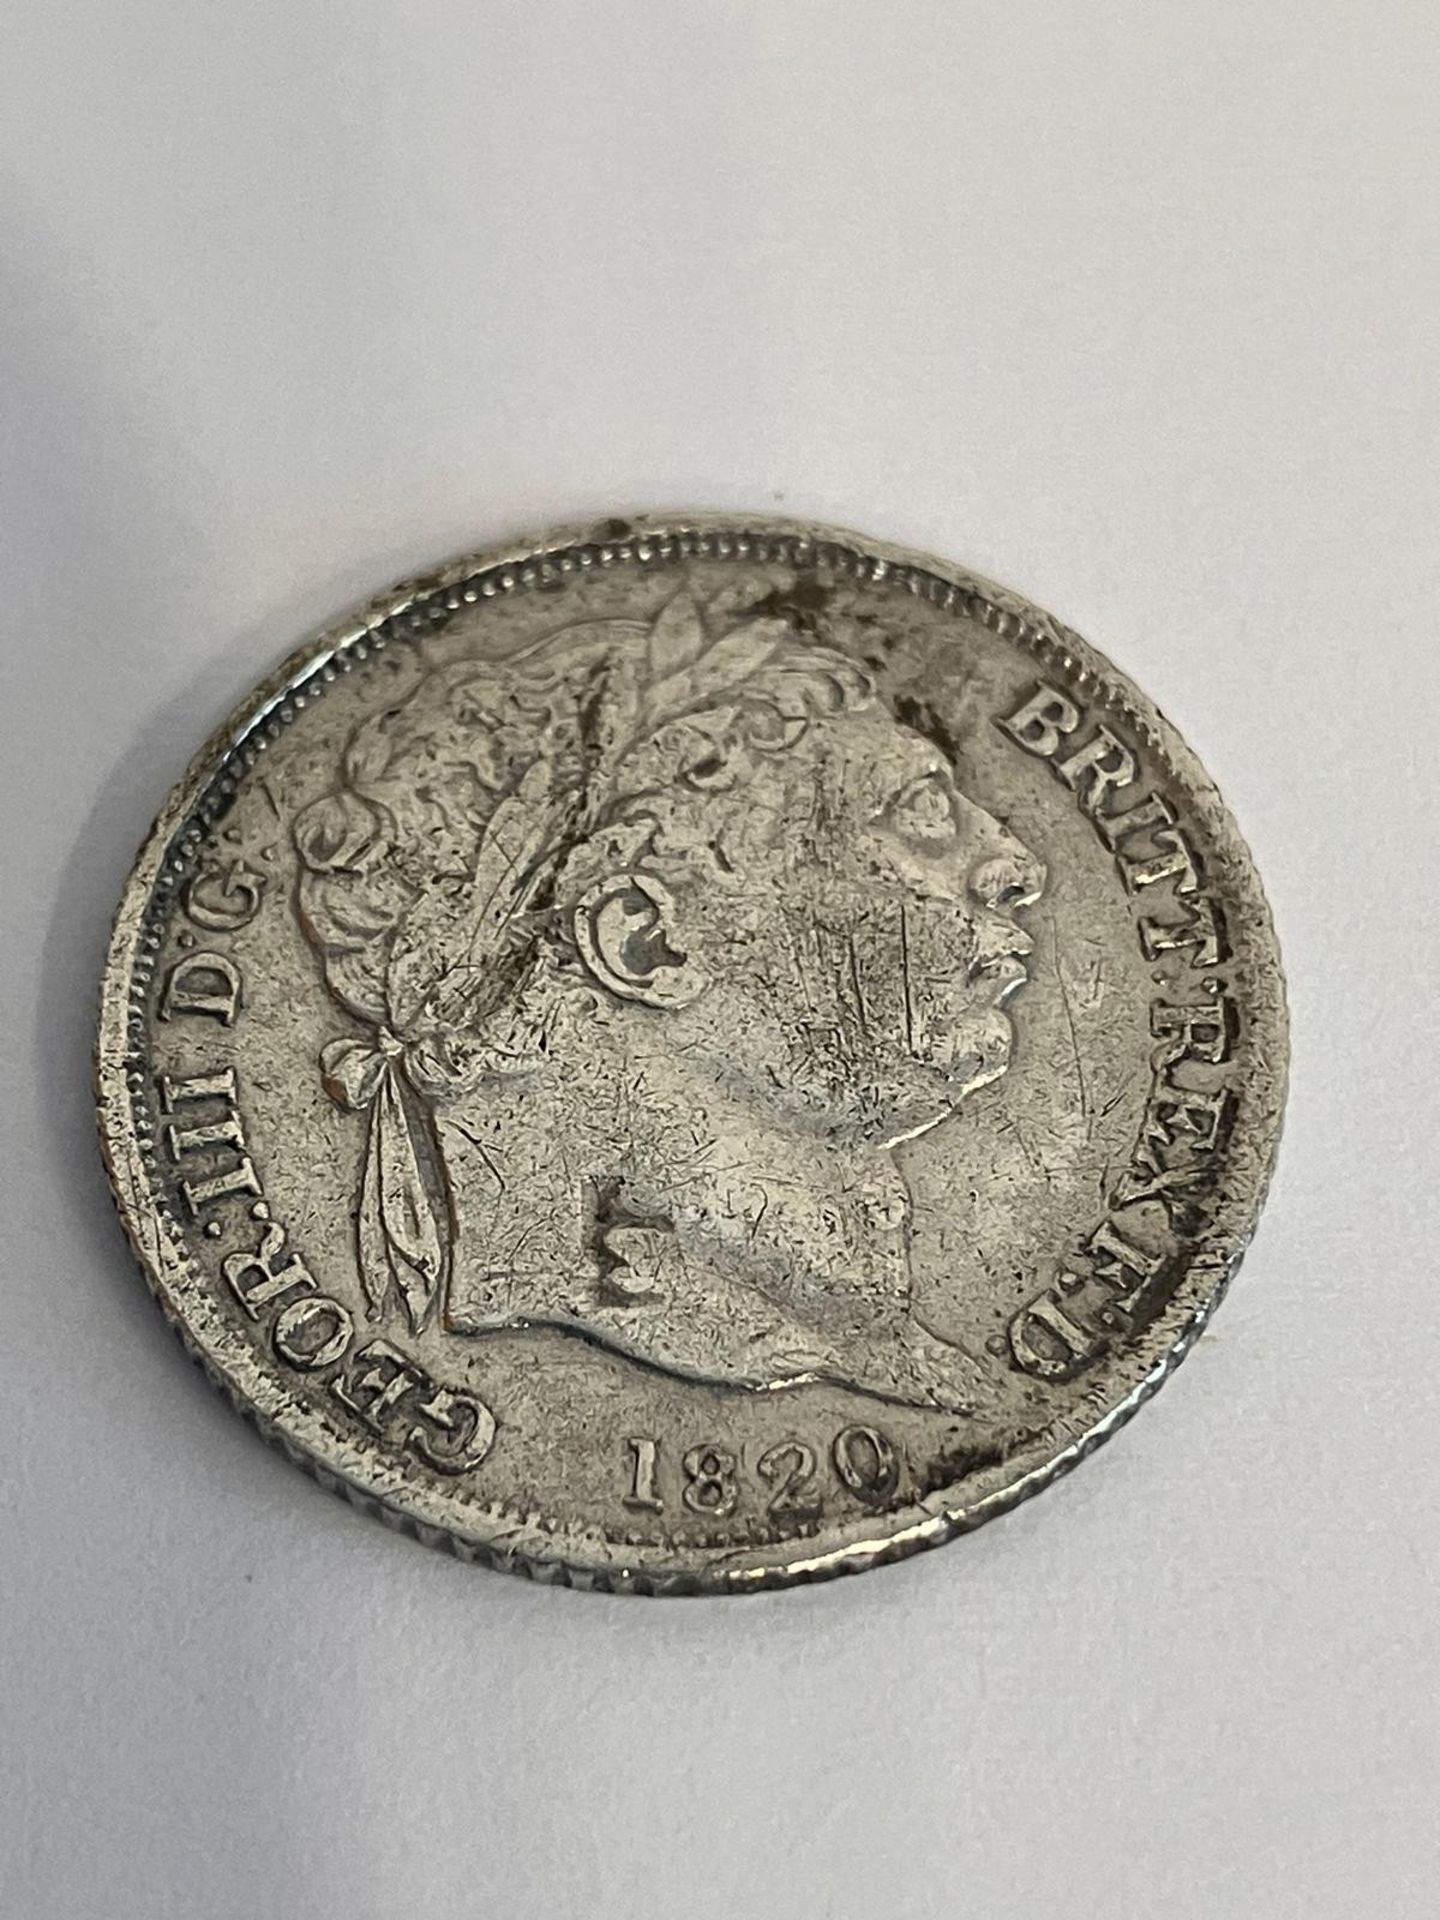 1820 GEORGE III SILVER SIXPENCE.Better grade coin. Extra fine condition. - Image 2 of 2